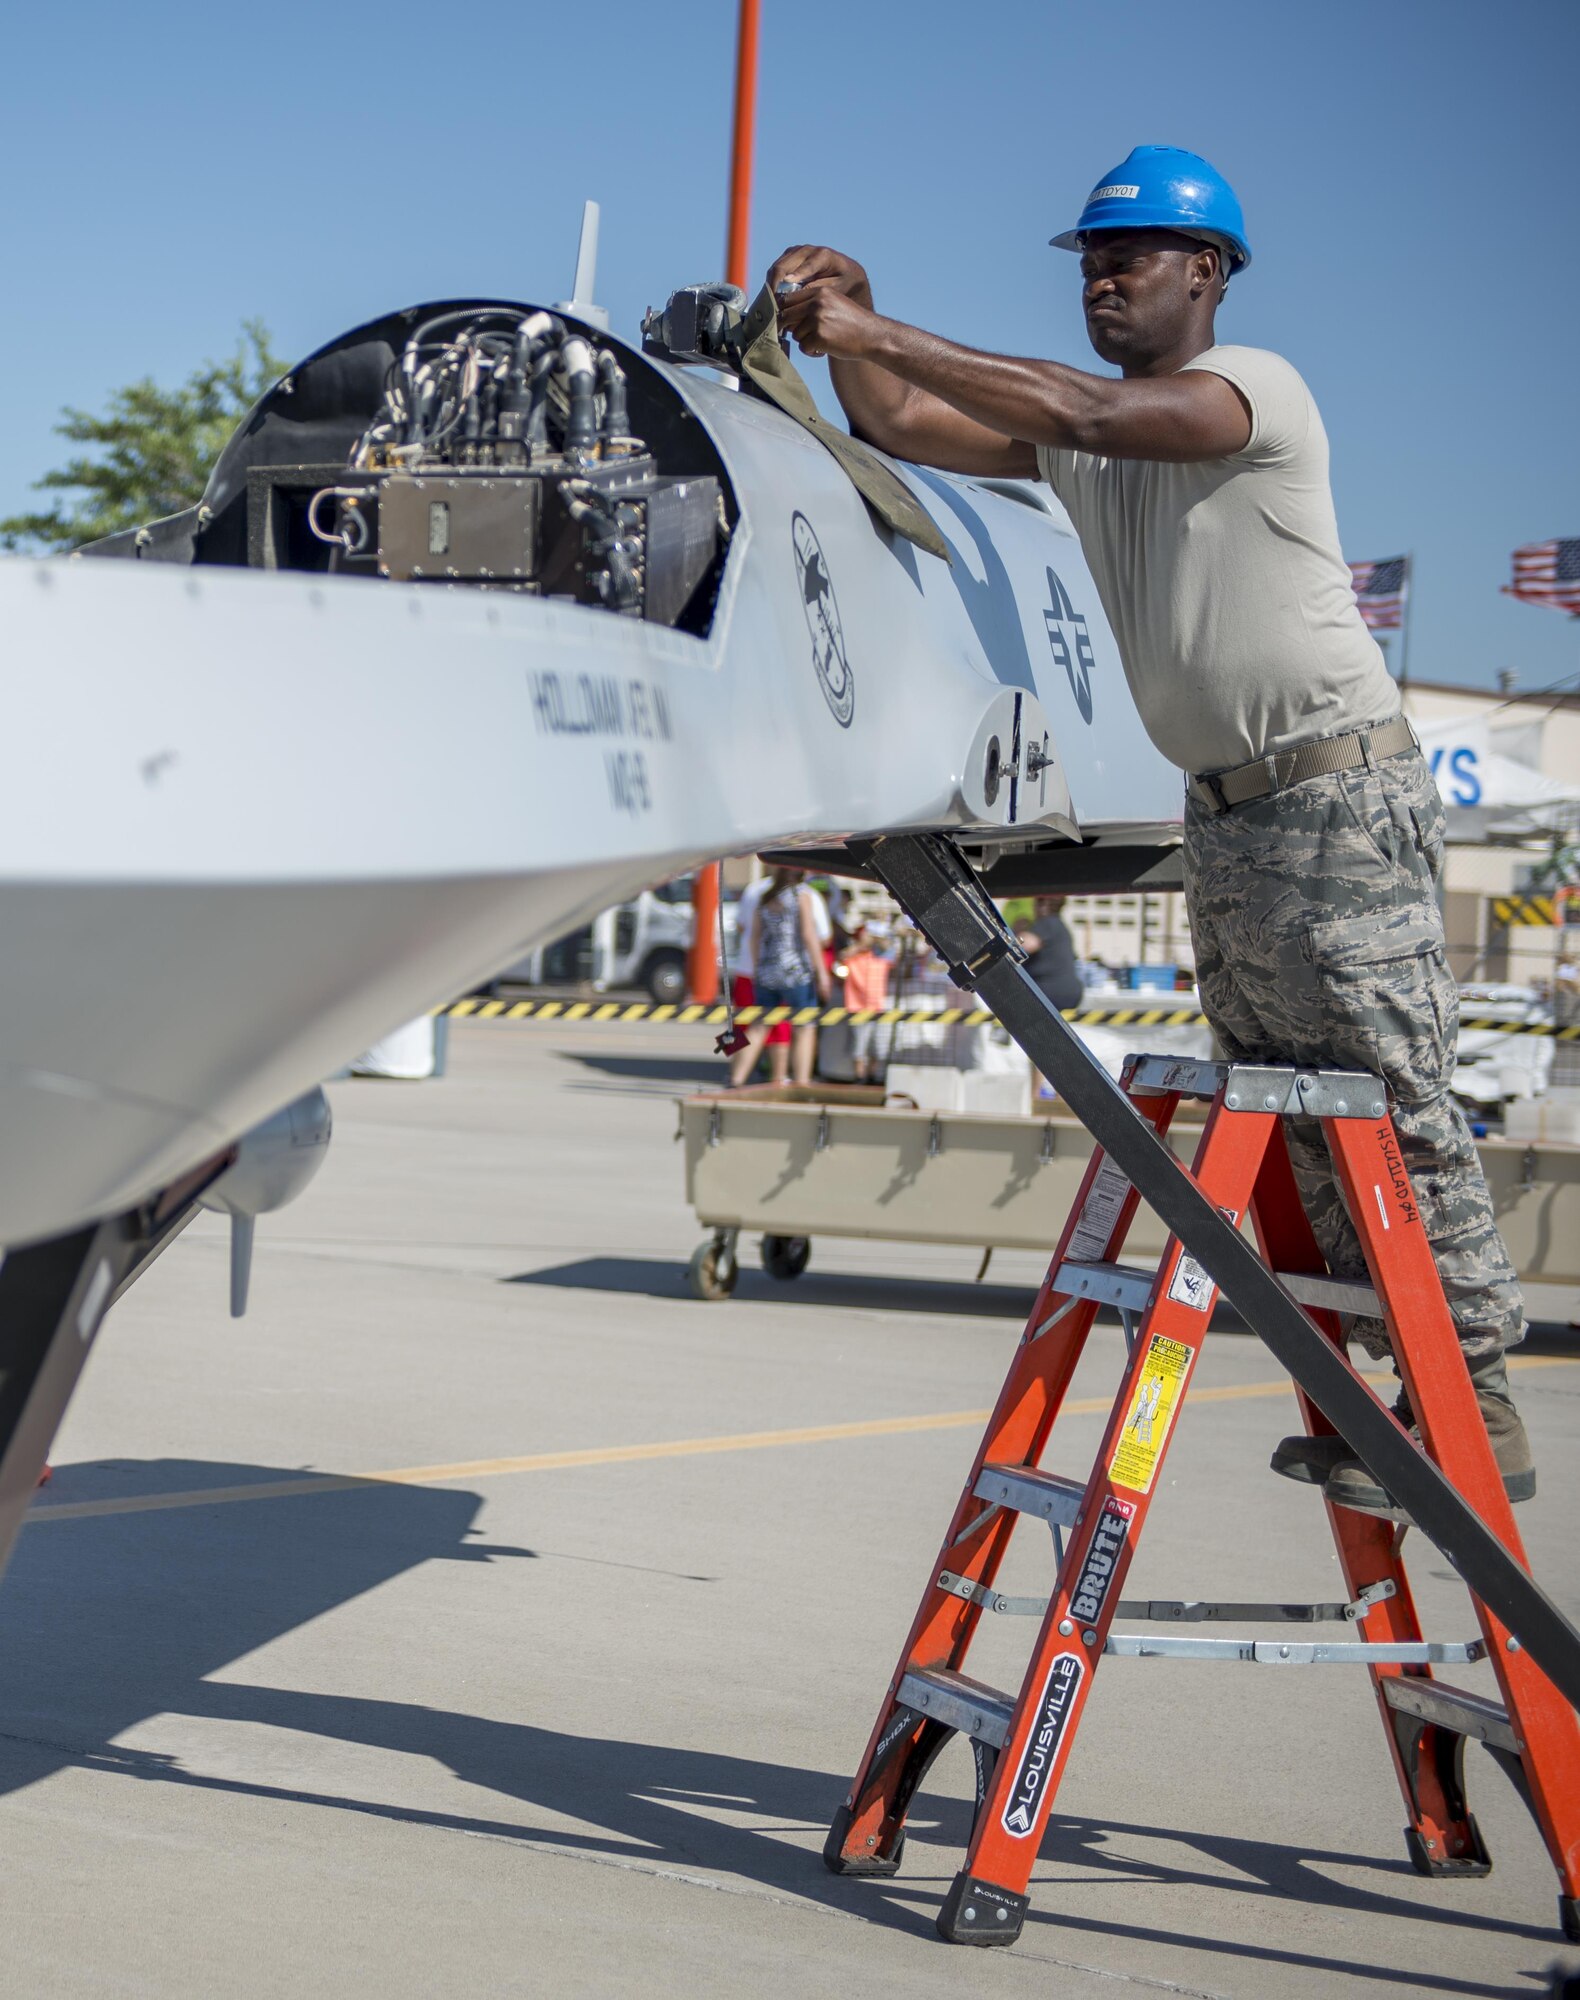 Staff Sgt. Omoro, a 9th Aircraft Maintenance Unit demo team leader at Holloman Air Force Base, N.M., assembles an MQ-1 Predator for the Kirtland AFB Open House on June 4. Holloman Airmen were able to fully construct the model MQ-1 Predator from a cargo container in 31 minutes. (Last names are being withheld due to operational requirements. U.S. Air Force photo by Airman 1st Class Randahl J. Jenson) 